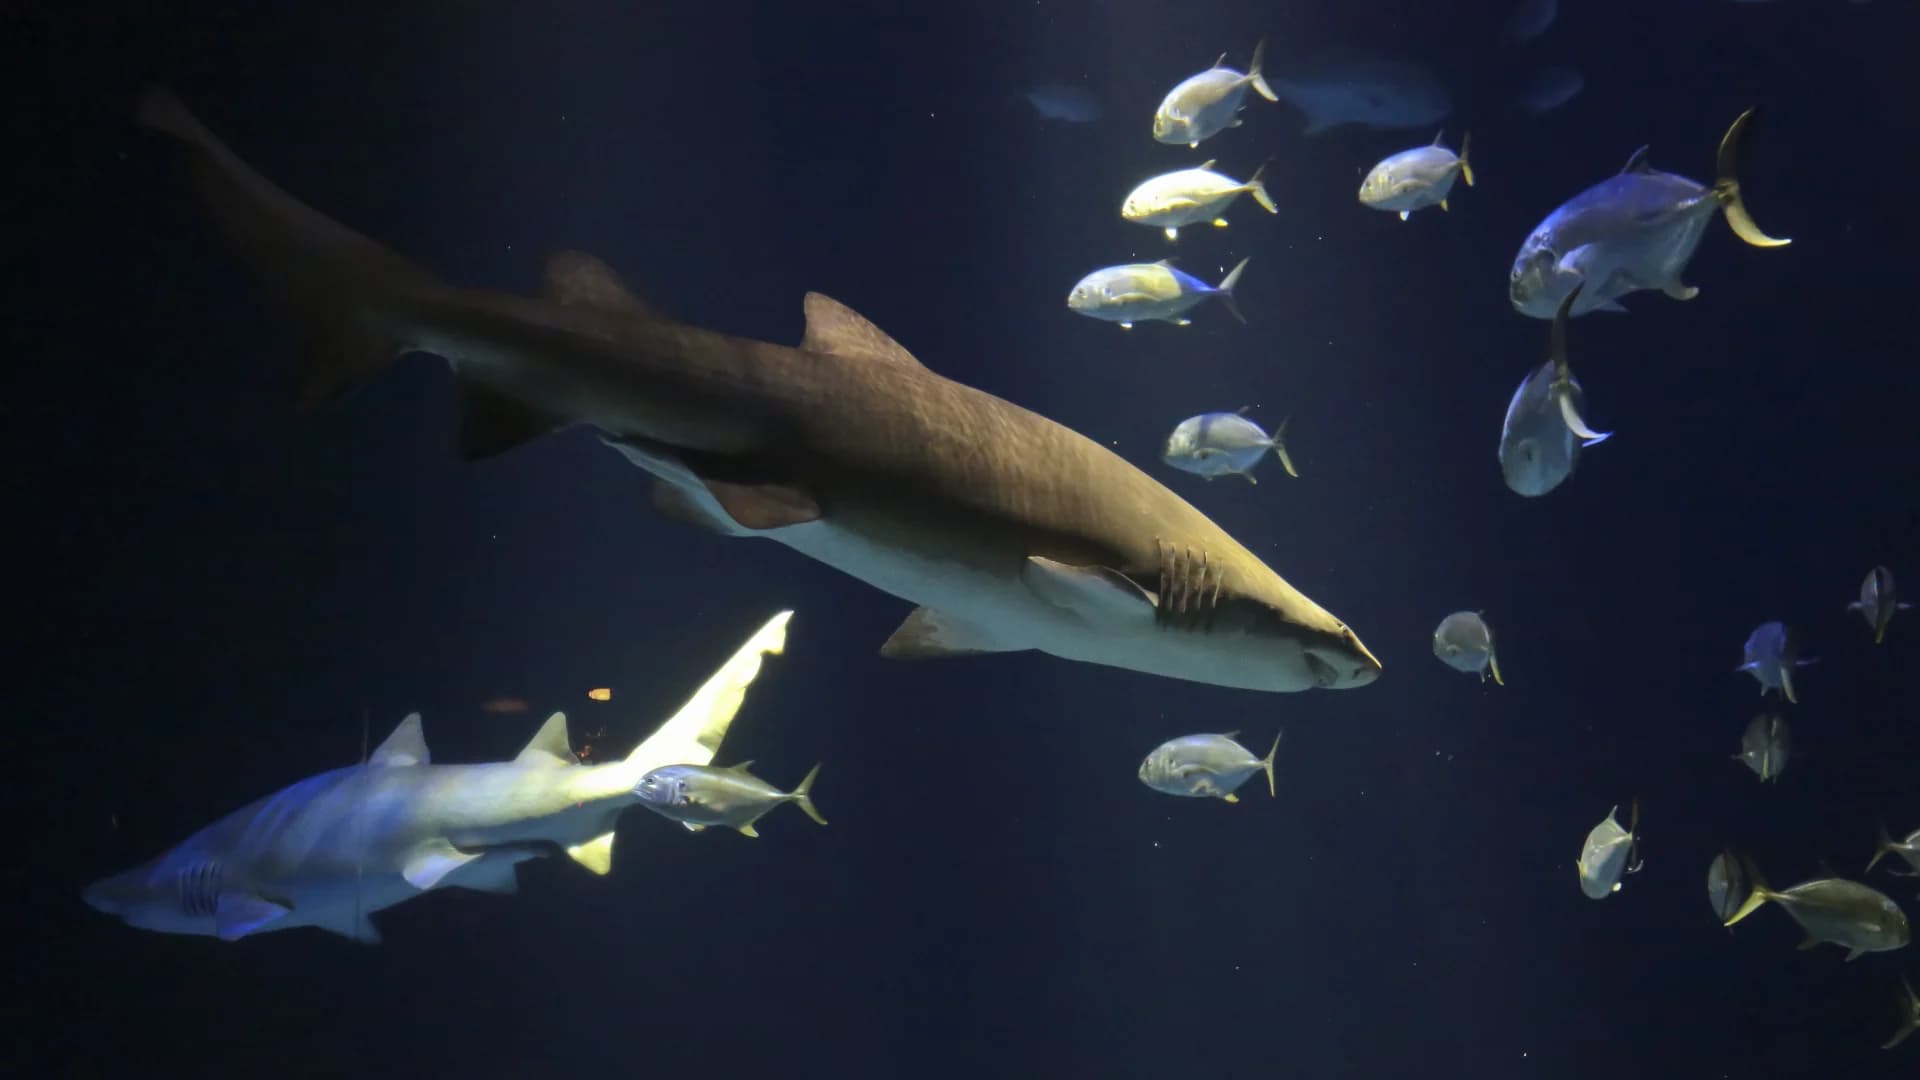 Are you looking for a wild virtual visit? Here are 3 videos of the New York Aquarium